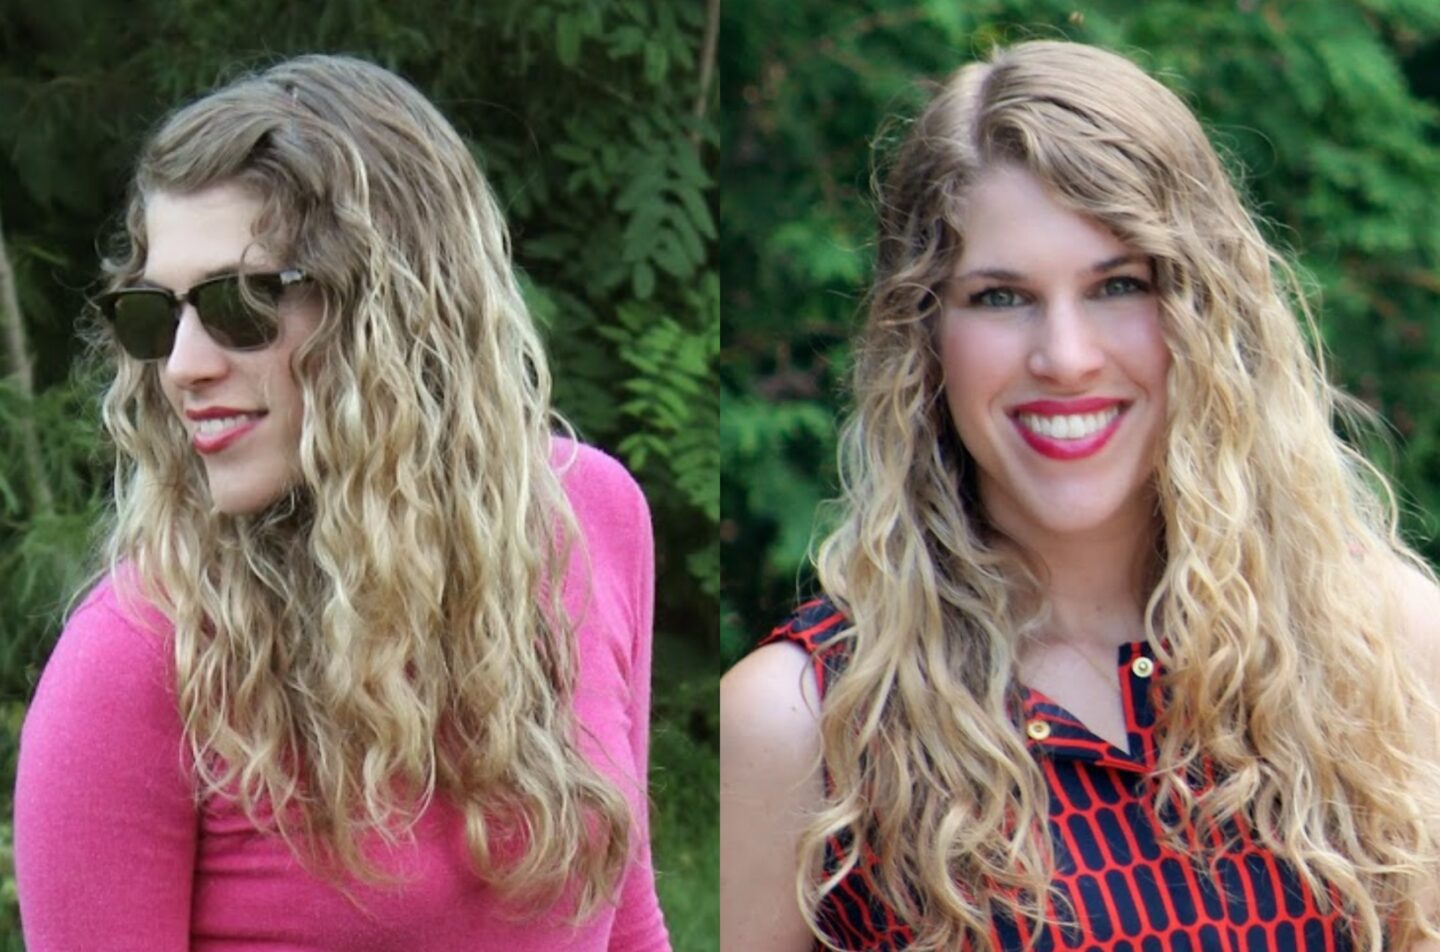 Curly Hair Evolution - I do deClaire